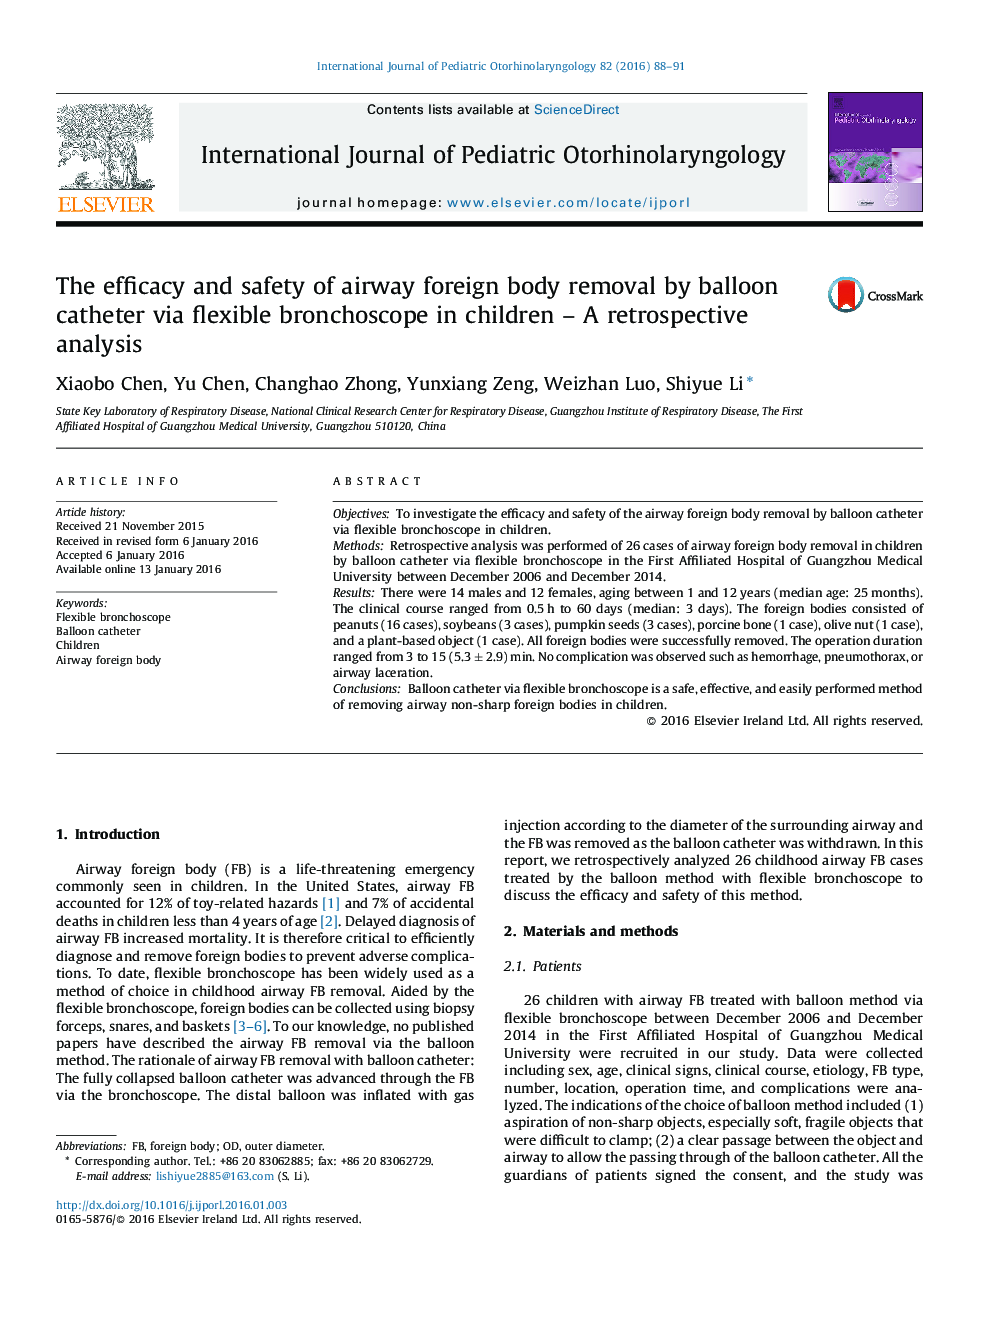 The efficacy and safety of airway foreign body removal by balloon catheter via flexible bronchoscope in children – A retrospective analysis